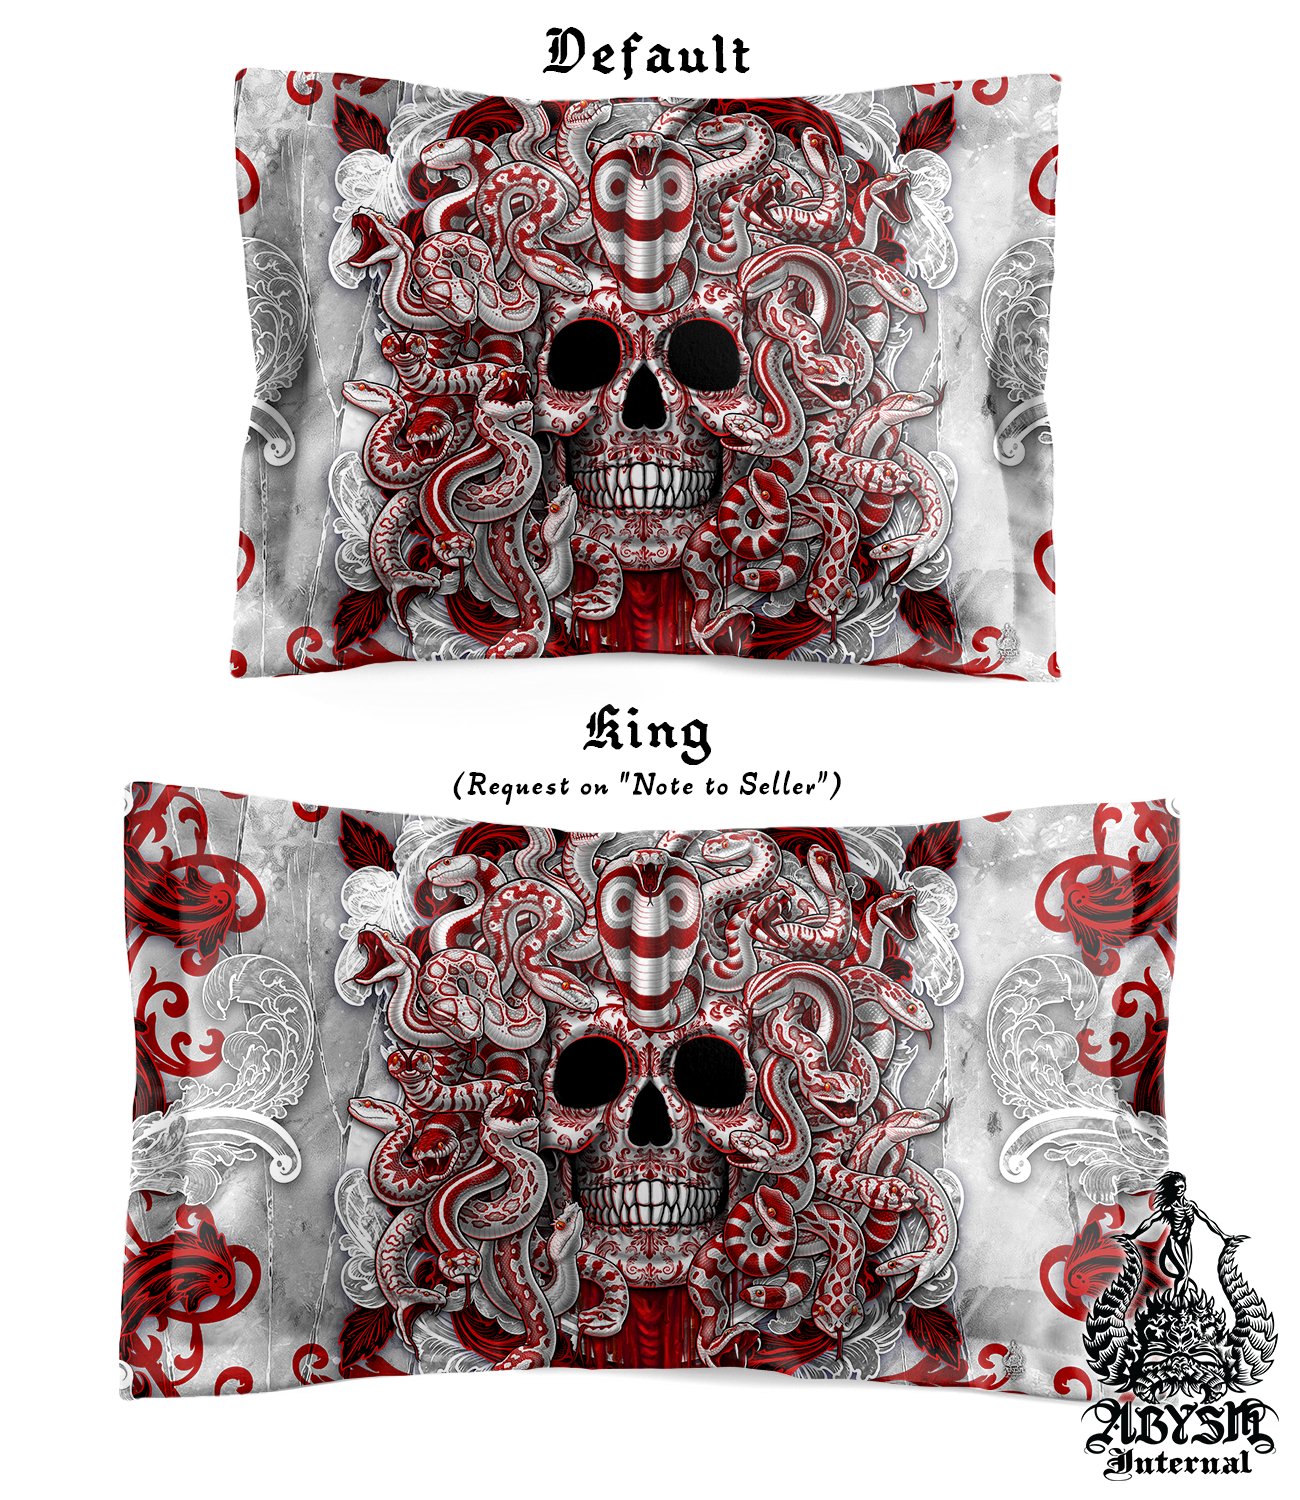 Gothic Bedding Set, Comforter or Duvet, White Goth Bed Cover, Bedroom Decor, Bloody Medusa Skull, King, Queen & Twin Size - 4 Faces - Abysm Internal